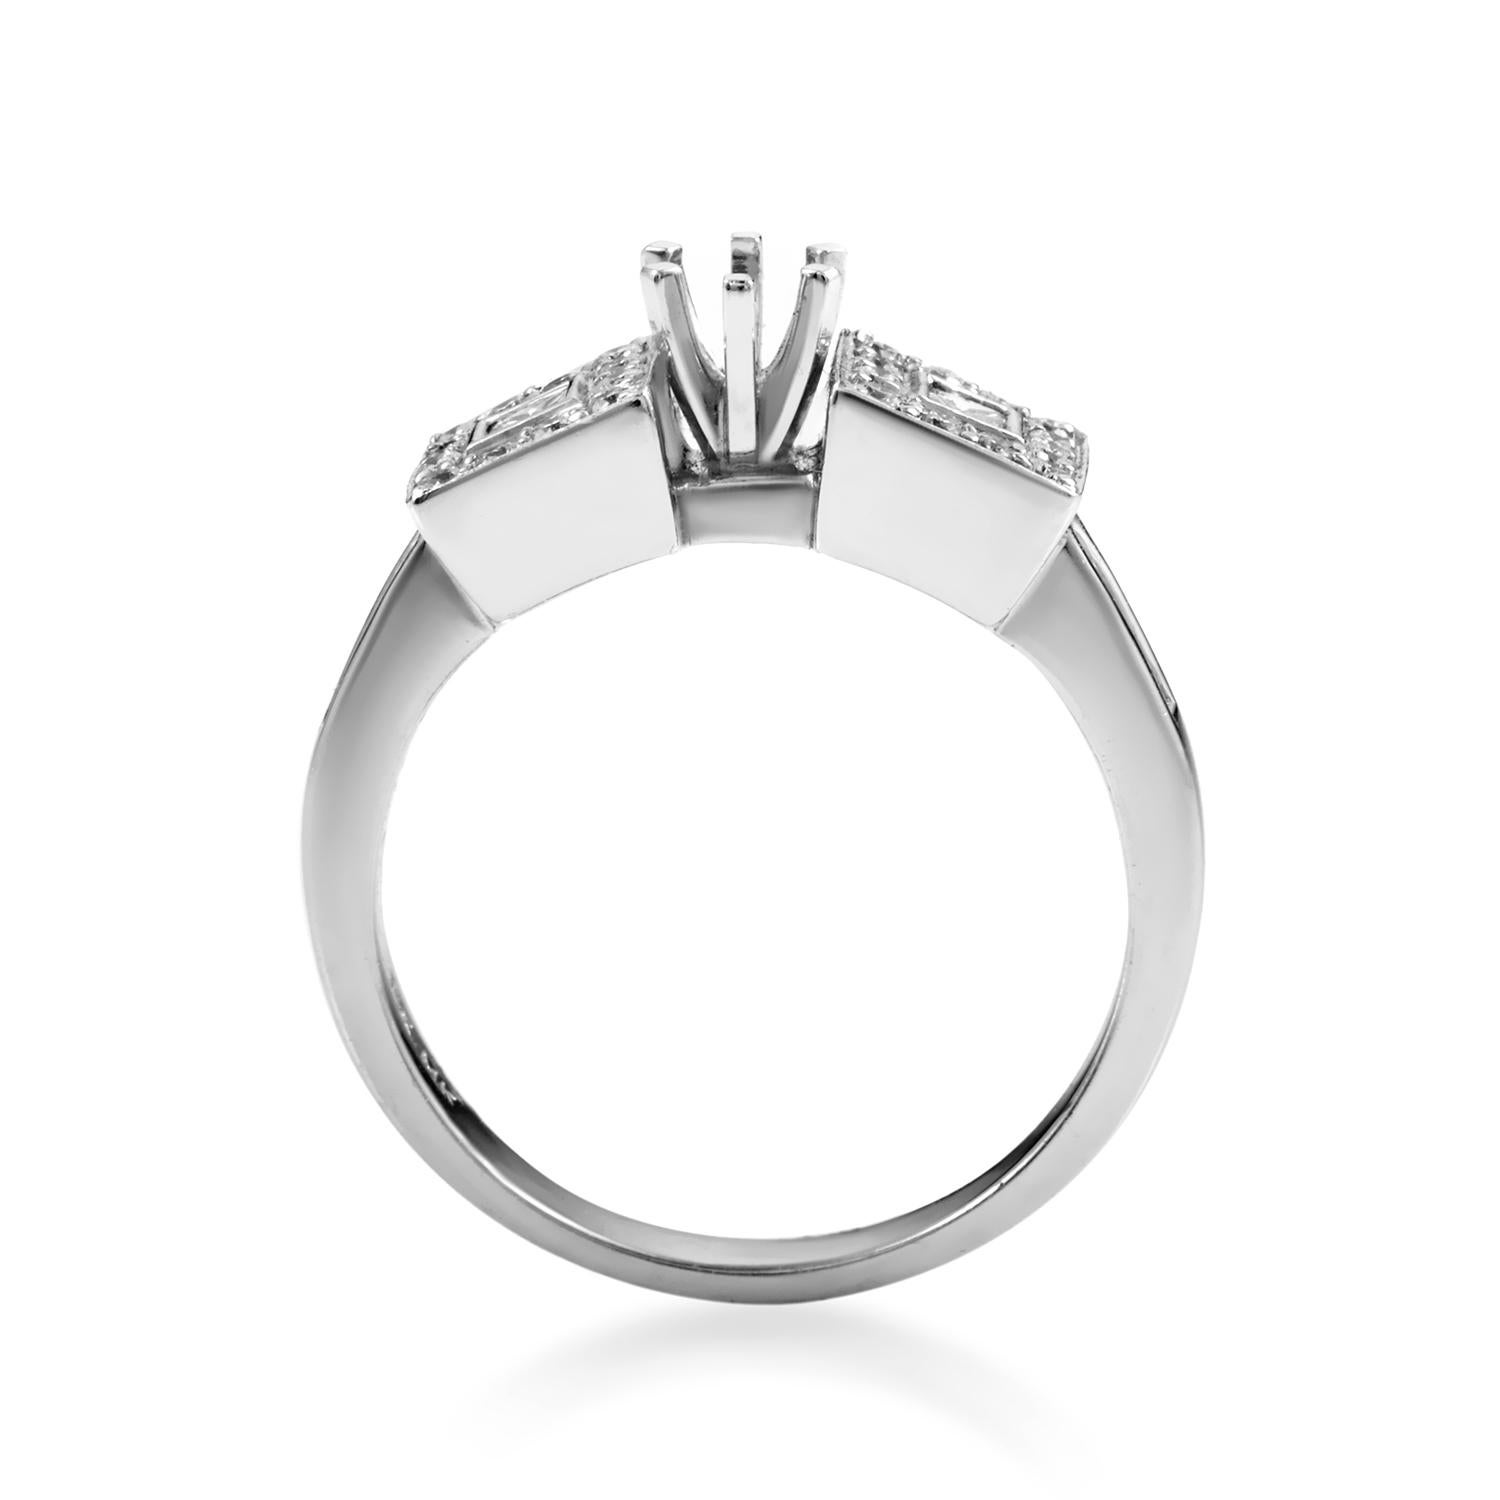 This gorgeous engagement ring setting from Natalie K is chic and refined; perfect for a lady with timeless style. The setting is made of 14K white gold and boasts ~.37ct of diamonds. The side stones are actually two squares set with a brilliant